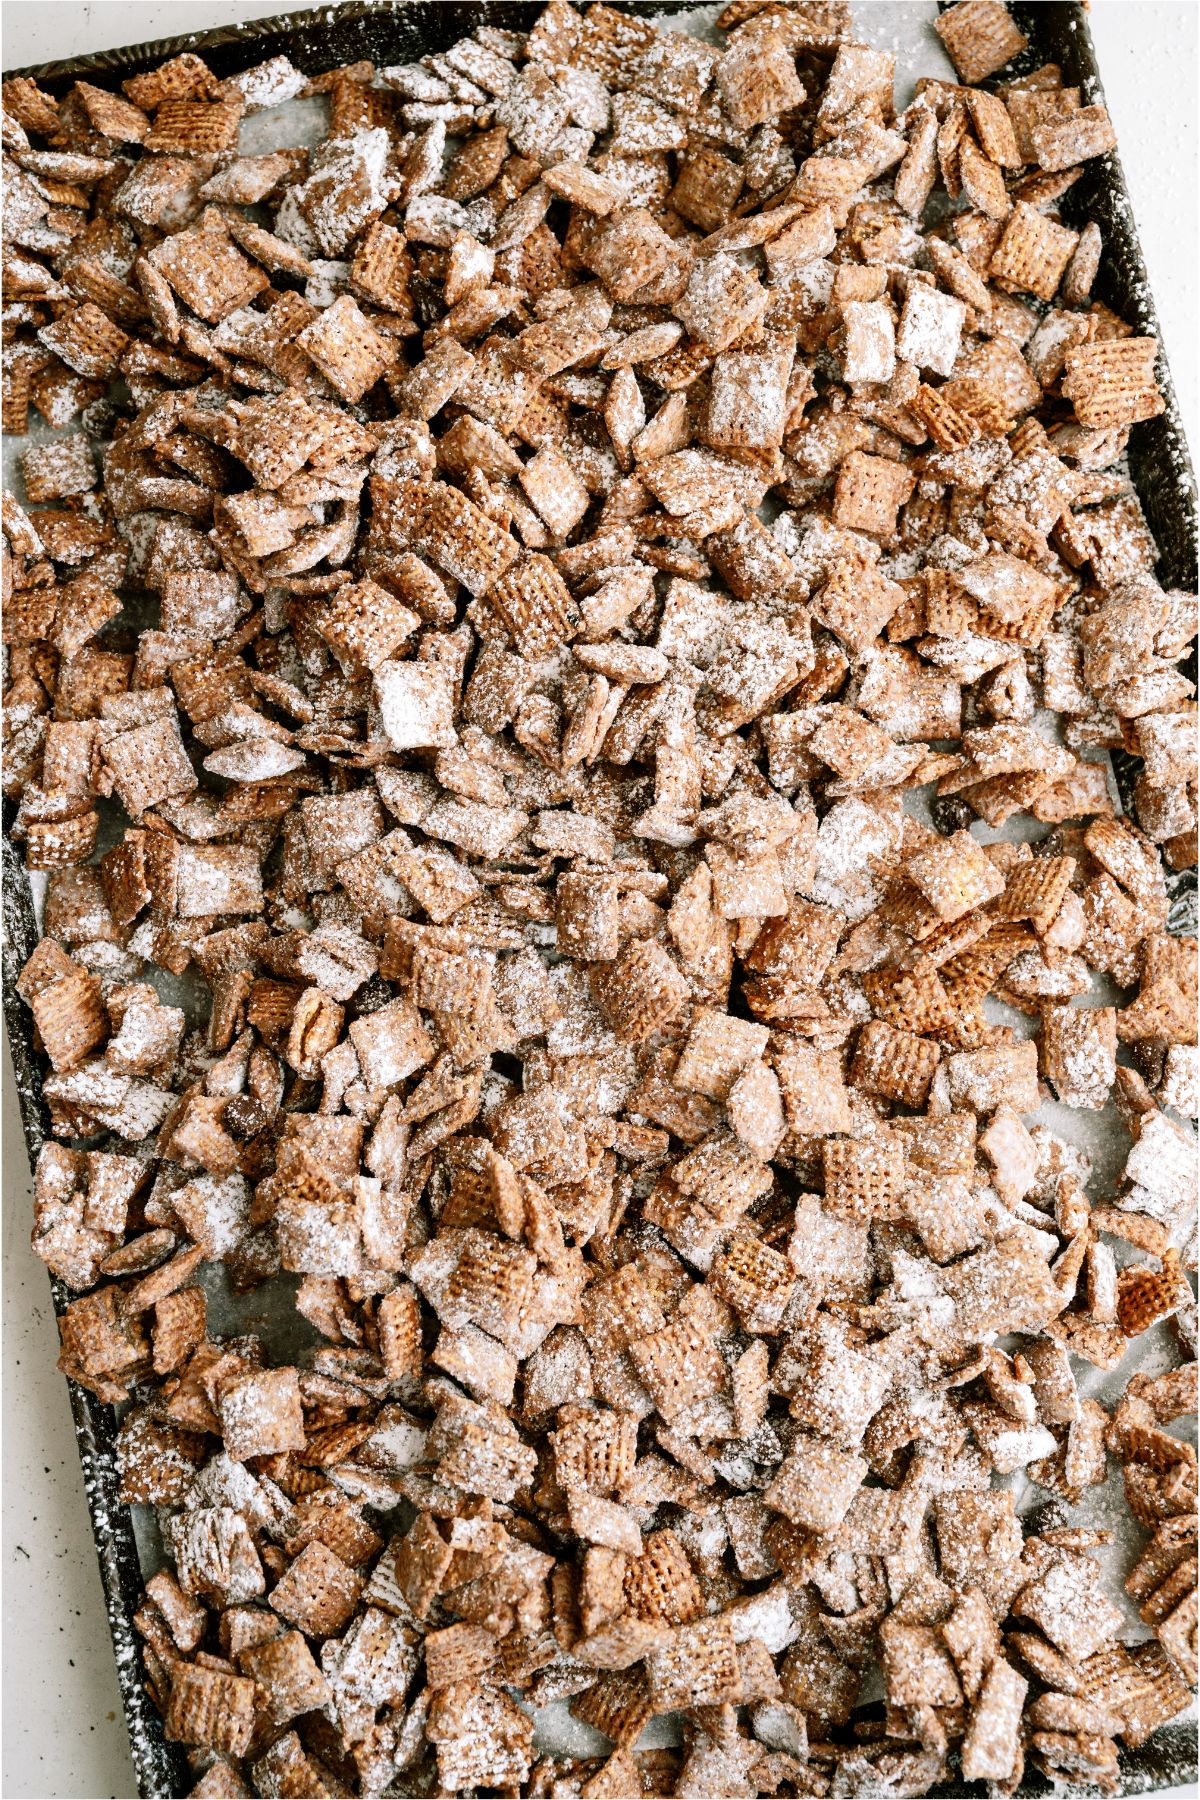 Large baking sheet filled with Muddy Buddies (Puppy Chow)